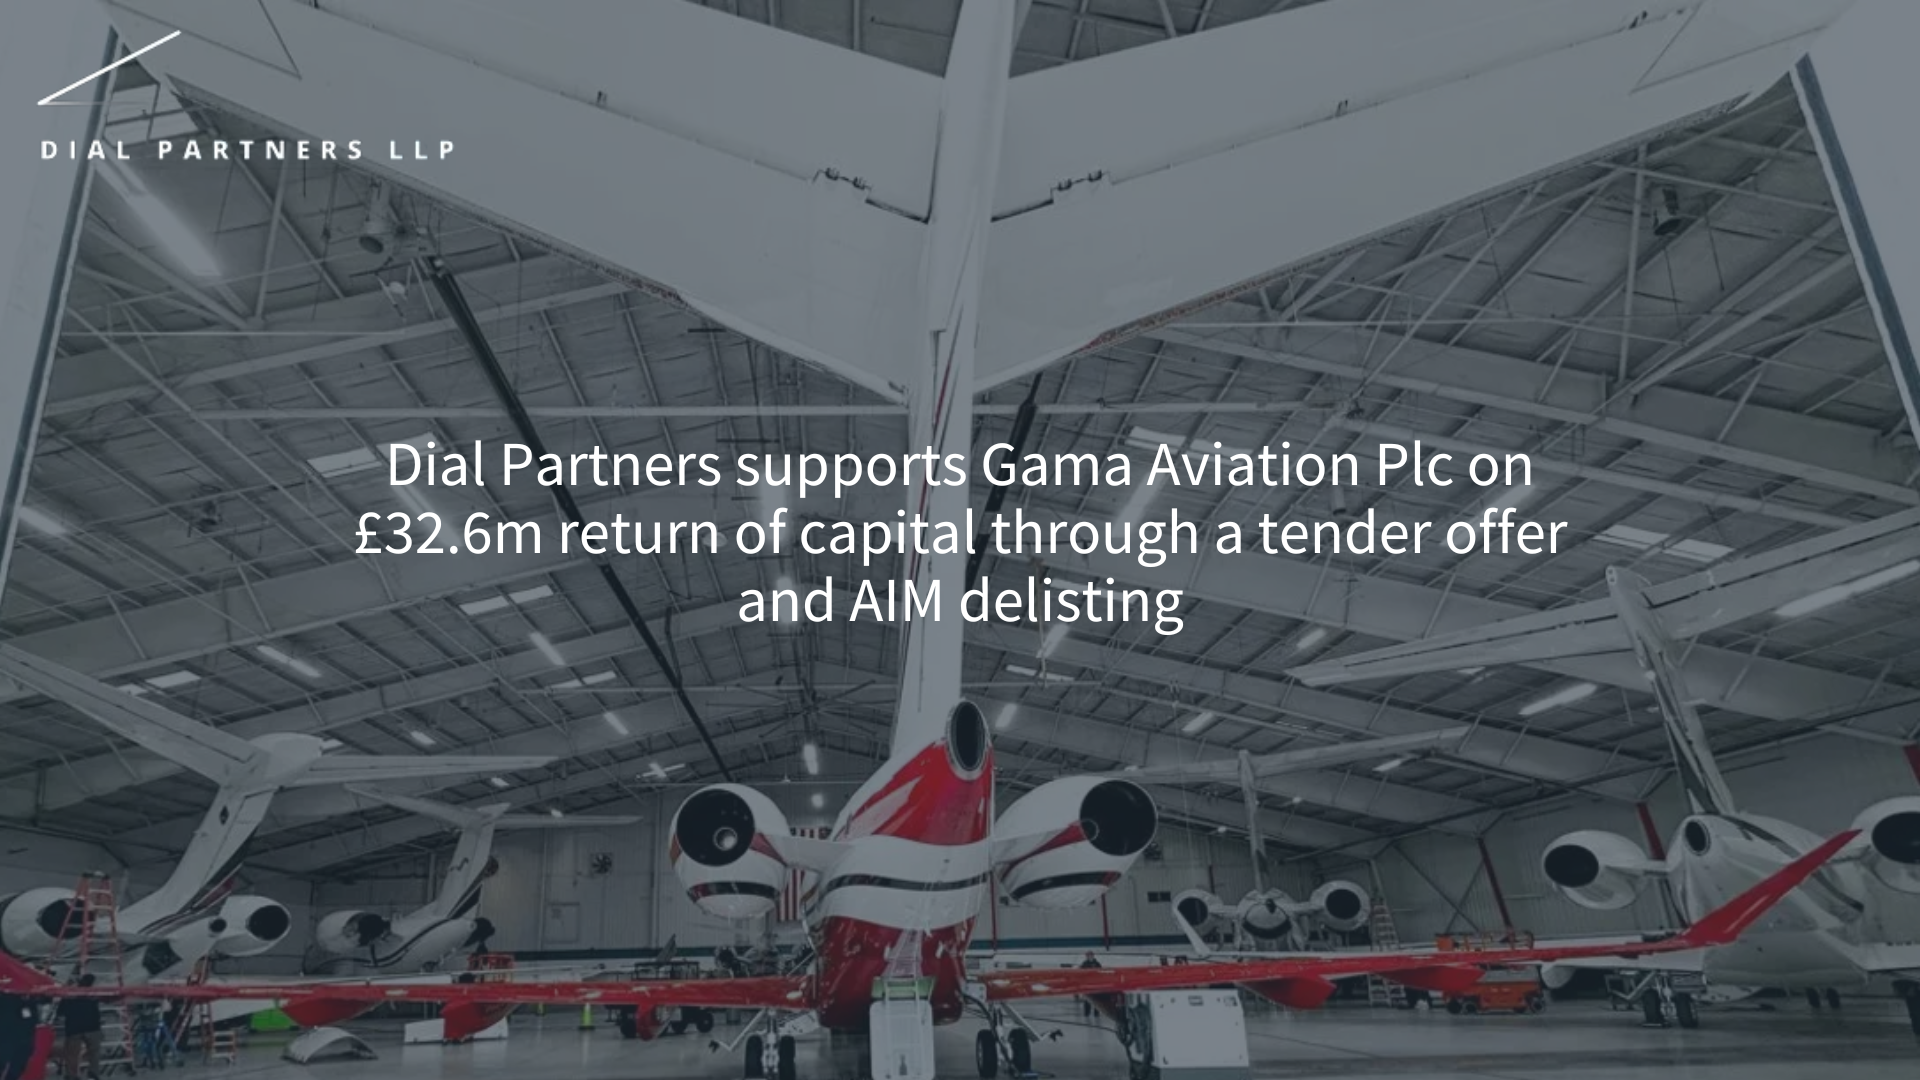 Dial Partners supports Gama Aviation on £32.6m return of capital through tender offer and AIM delist